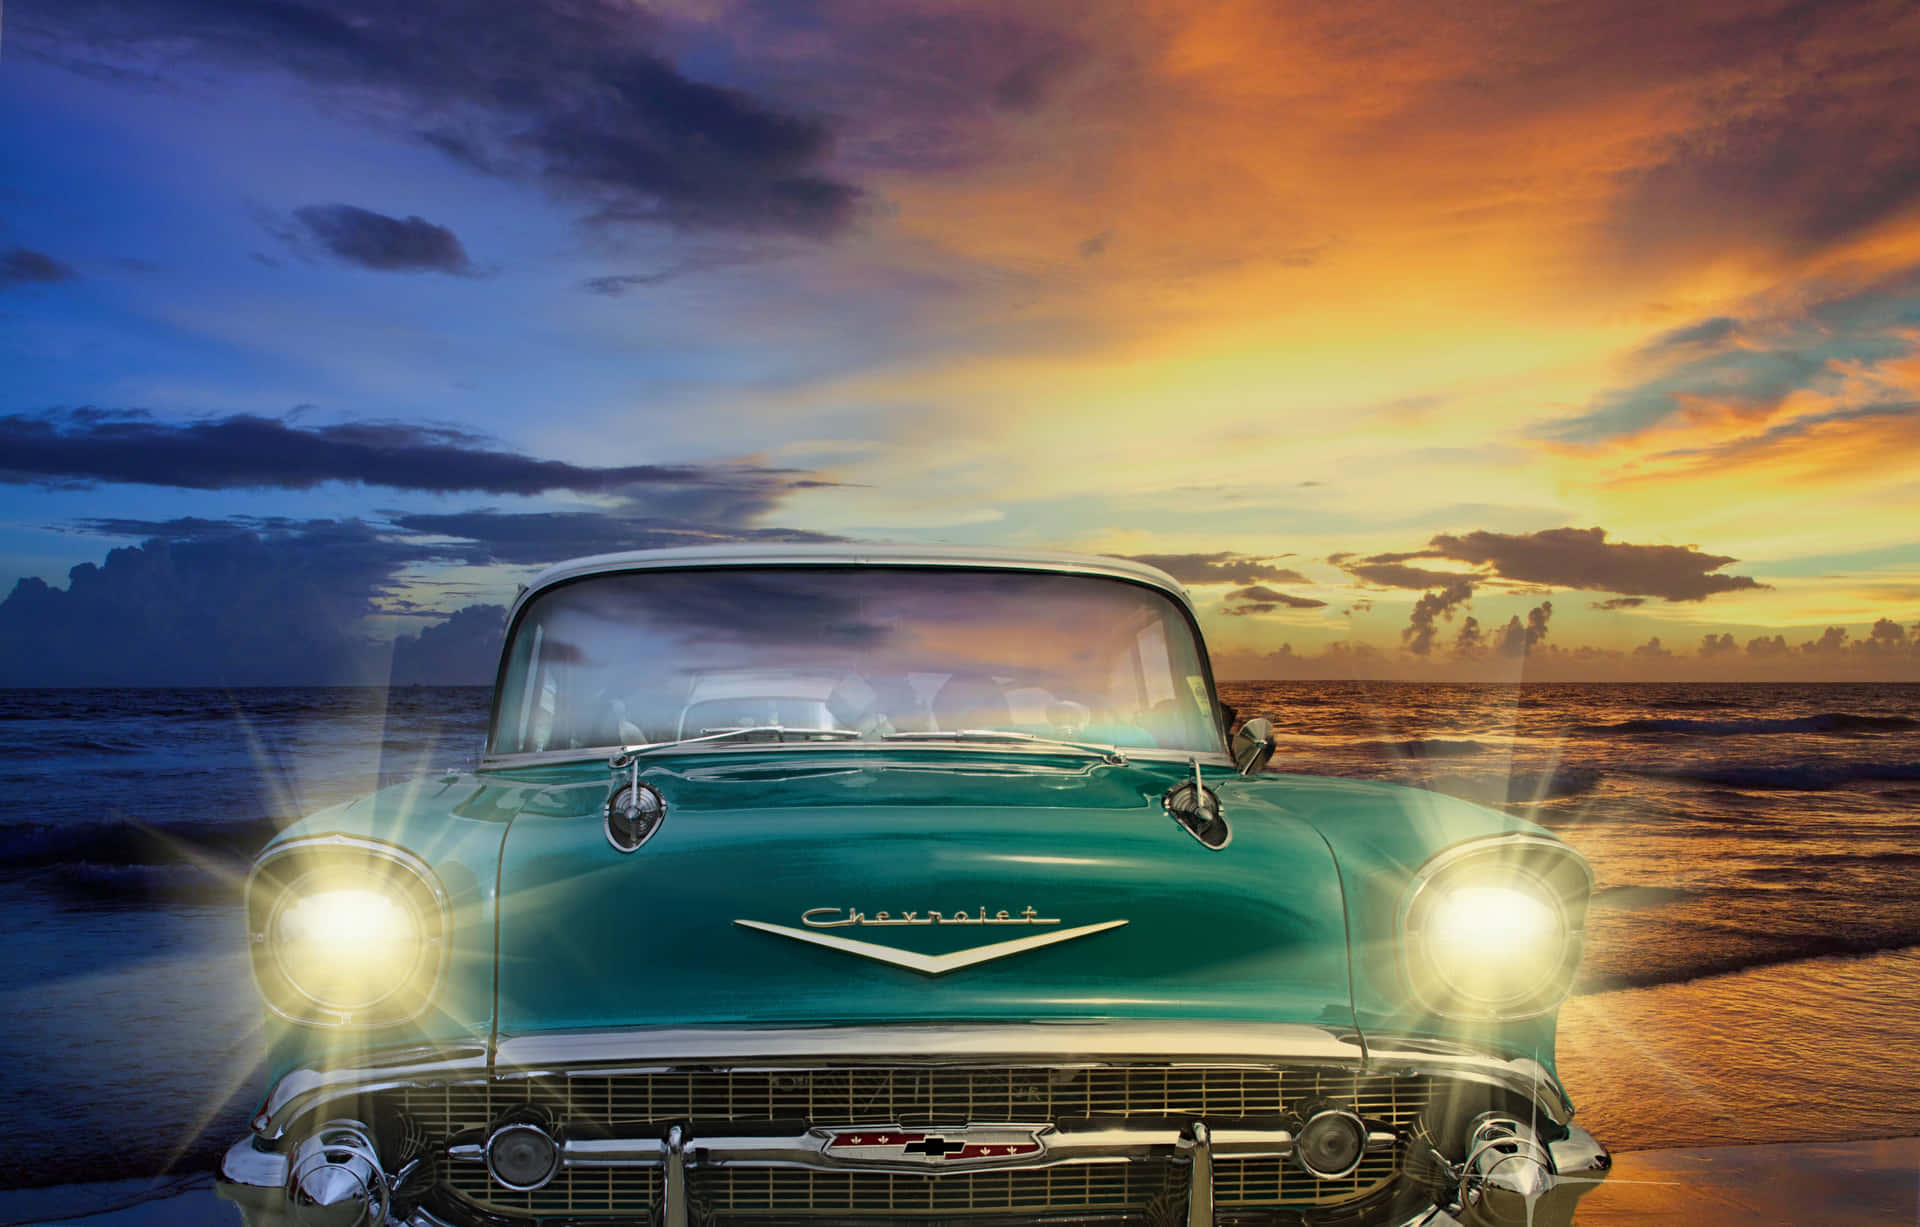 Vintage Car Chevy At Beach Pictures